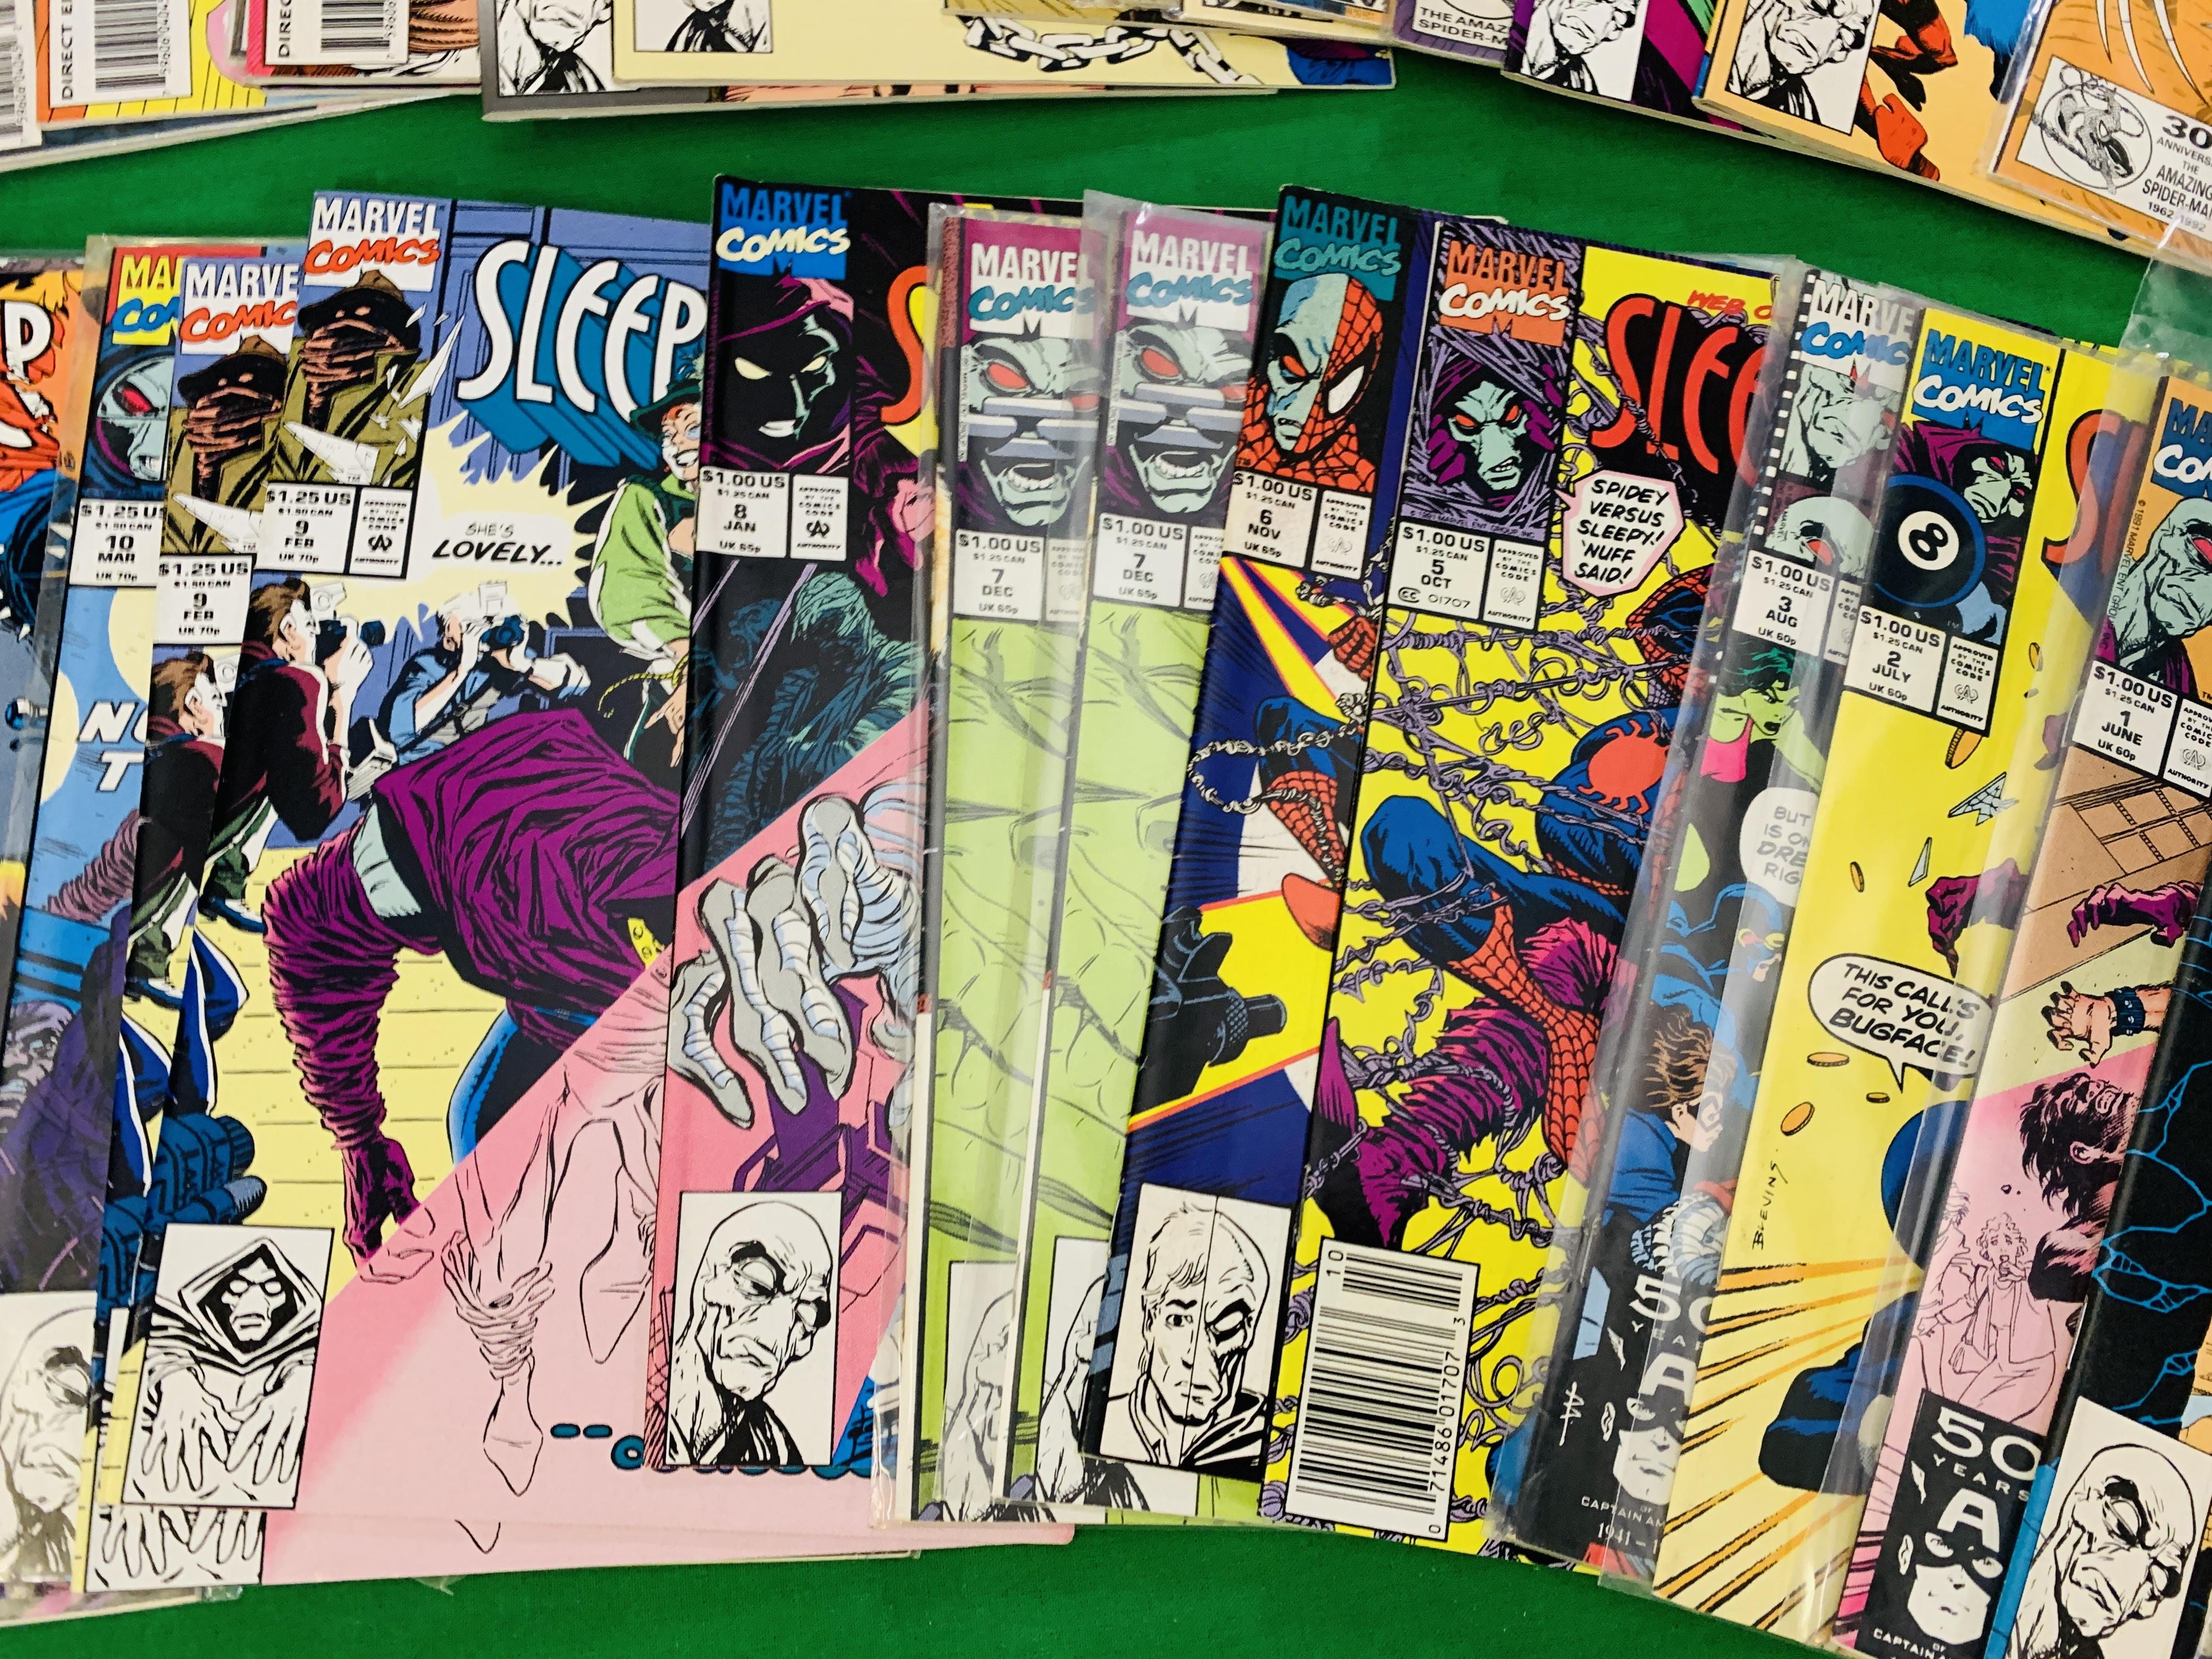 MARVEL COMICS SLEEPWALKER NO. 1 - 33 FROM 1991, FIRST APPEARANCE NO. - Image 3 of 7